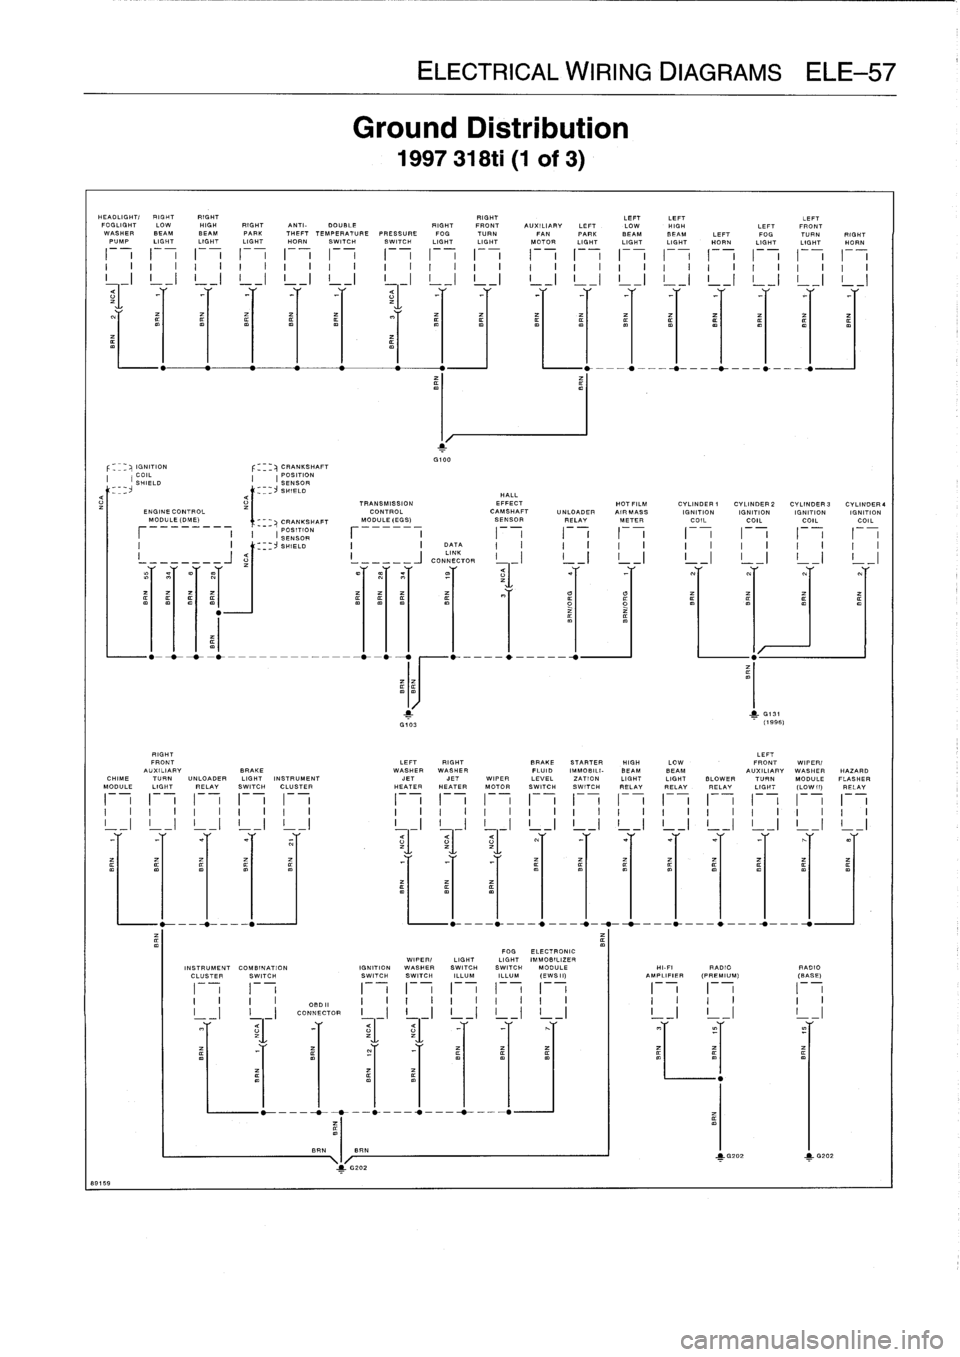 BMW 328i 1994 E36 Service Manual 
Ground
Distribution

1997
318ti
(1
of
3)

HEADLIGHT/RIGHTRIGHT

	

RIGHT

	

LEFTLEFT

	

LEFT

89159

FOGLIGHT
LOW
HIGH
RIGHT
ANTI-
DOUBLE

	

RIGHT
FRONT
AUXILIARY
LEFT
LOW
HIGH

	

LEFT
FRONT
WASH